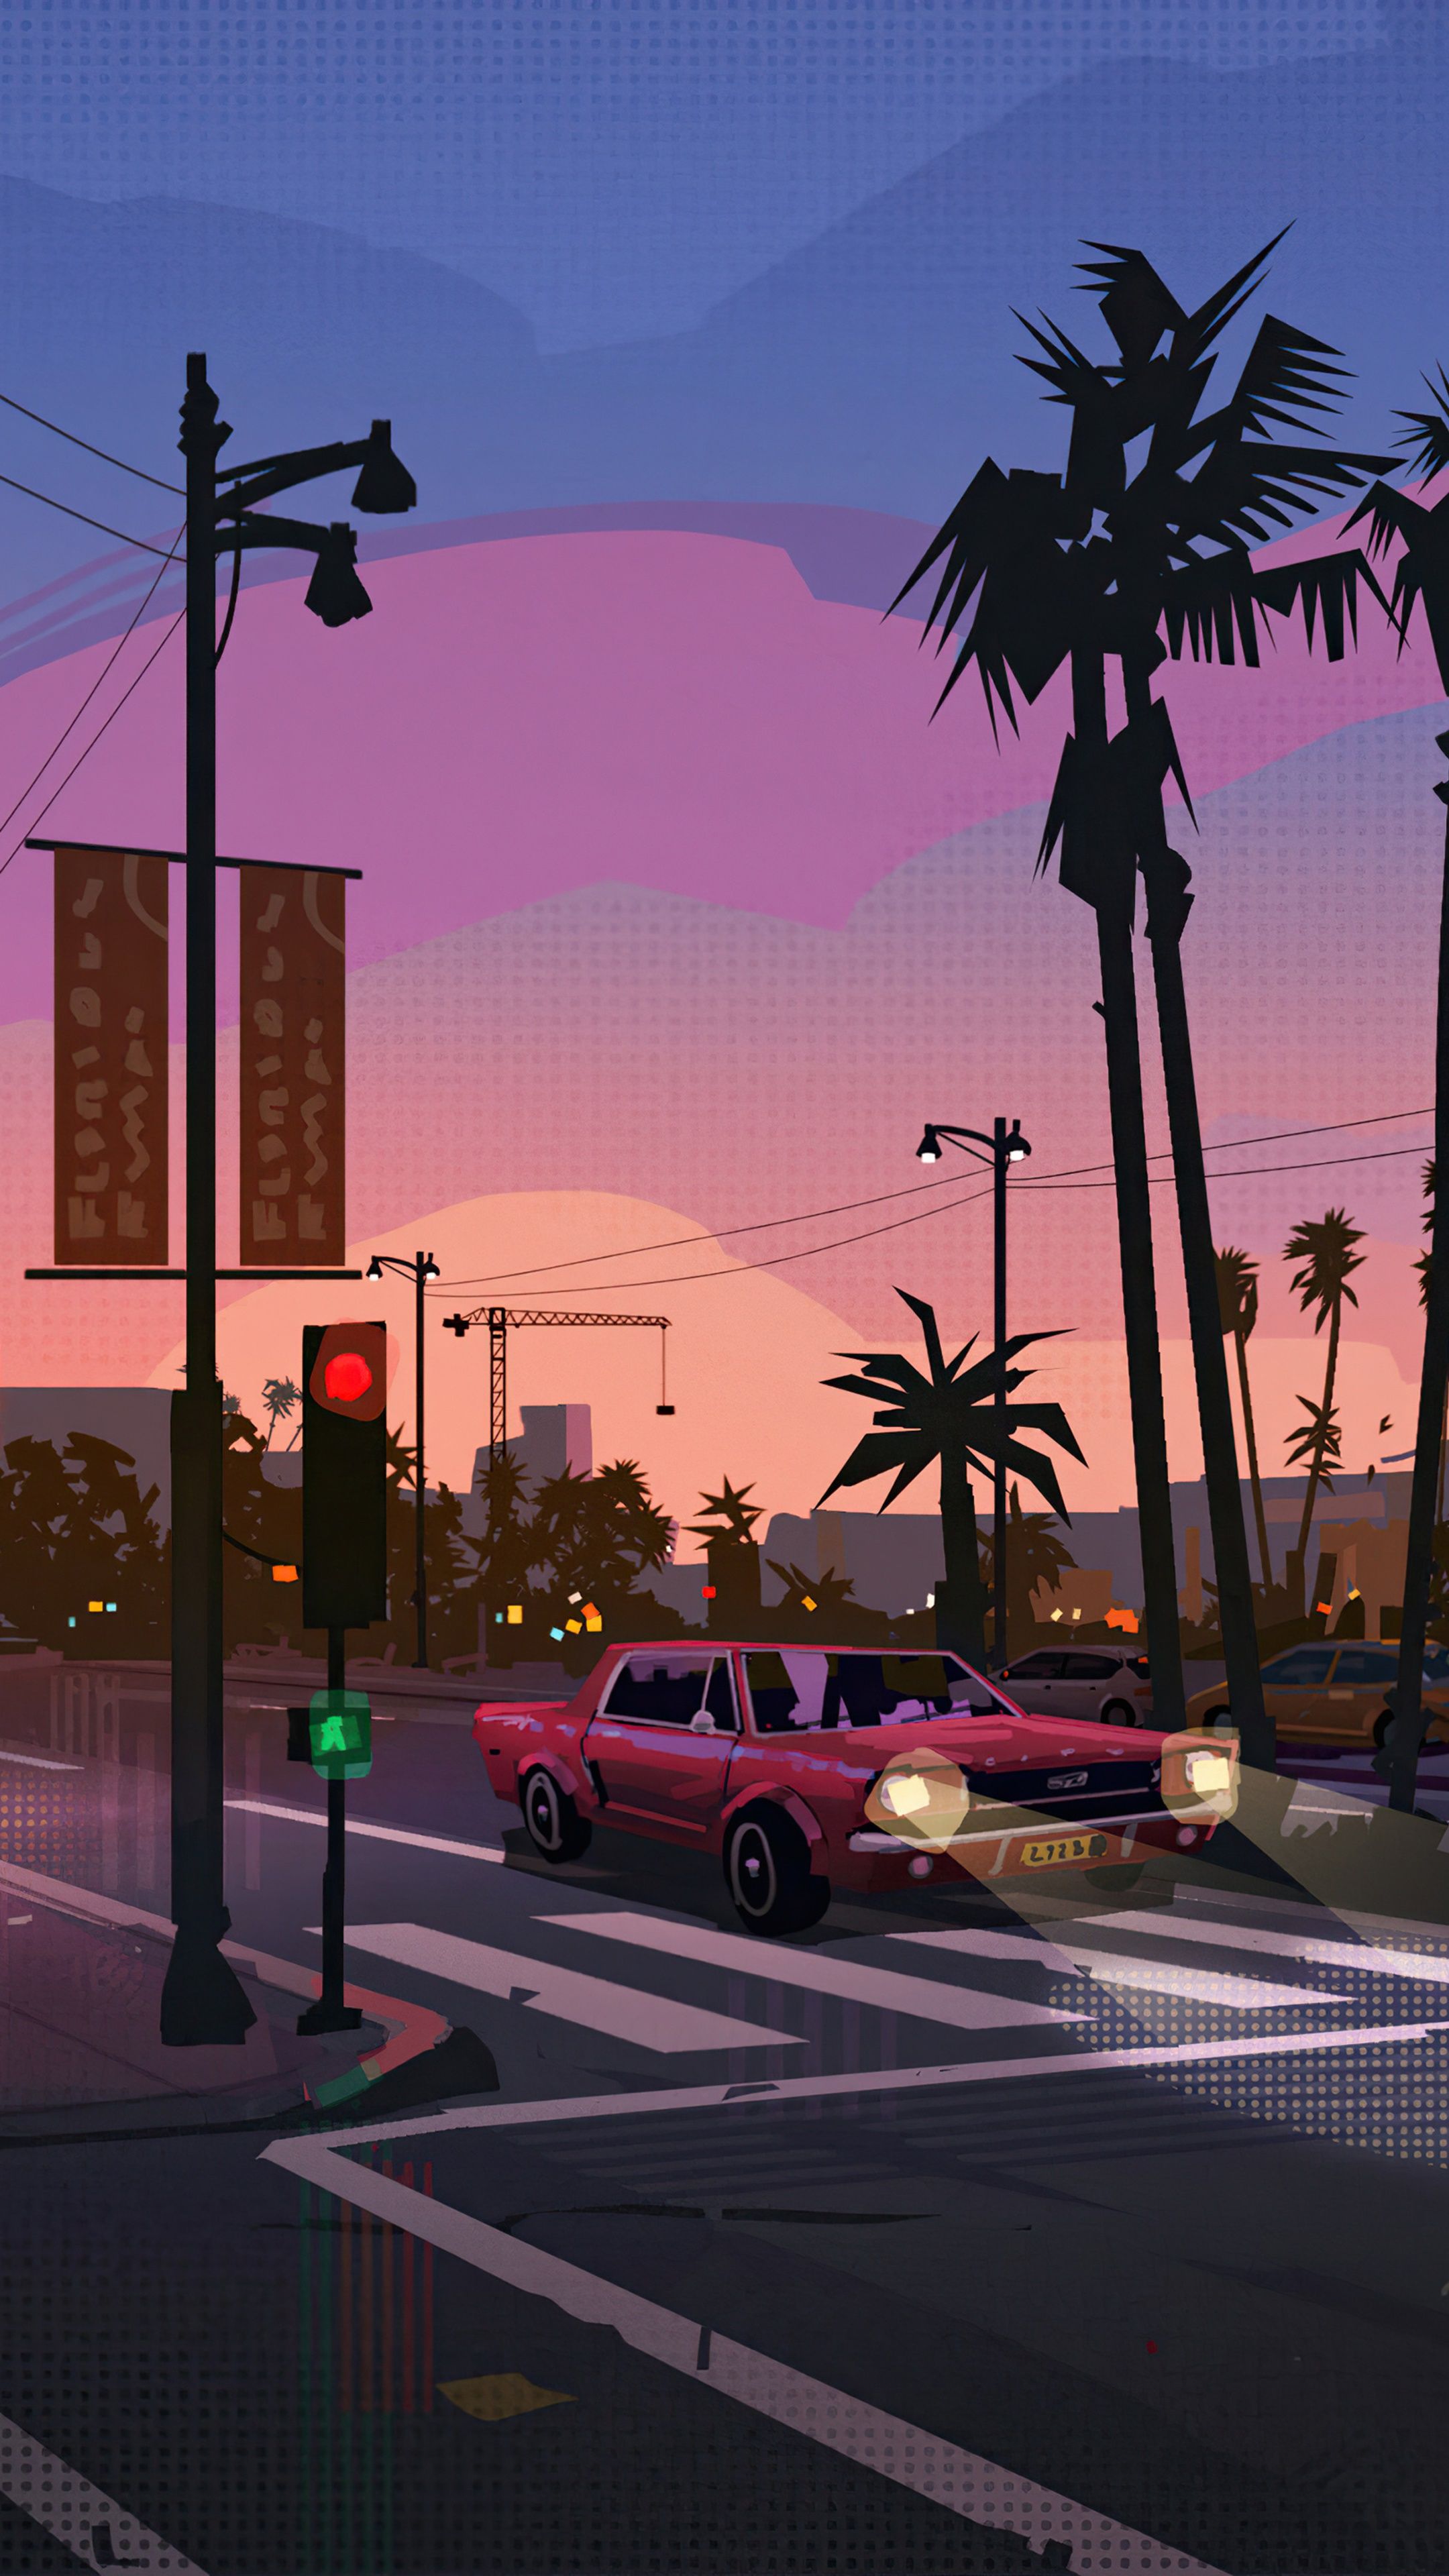 A street scene with cars and palm trees - Road